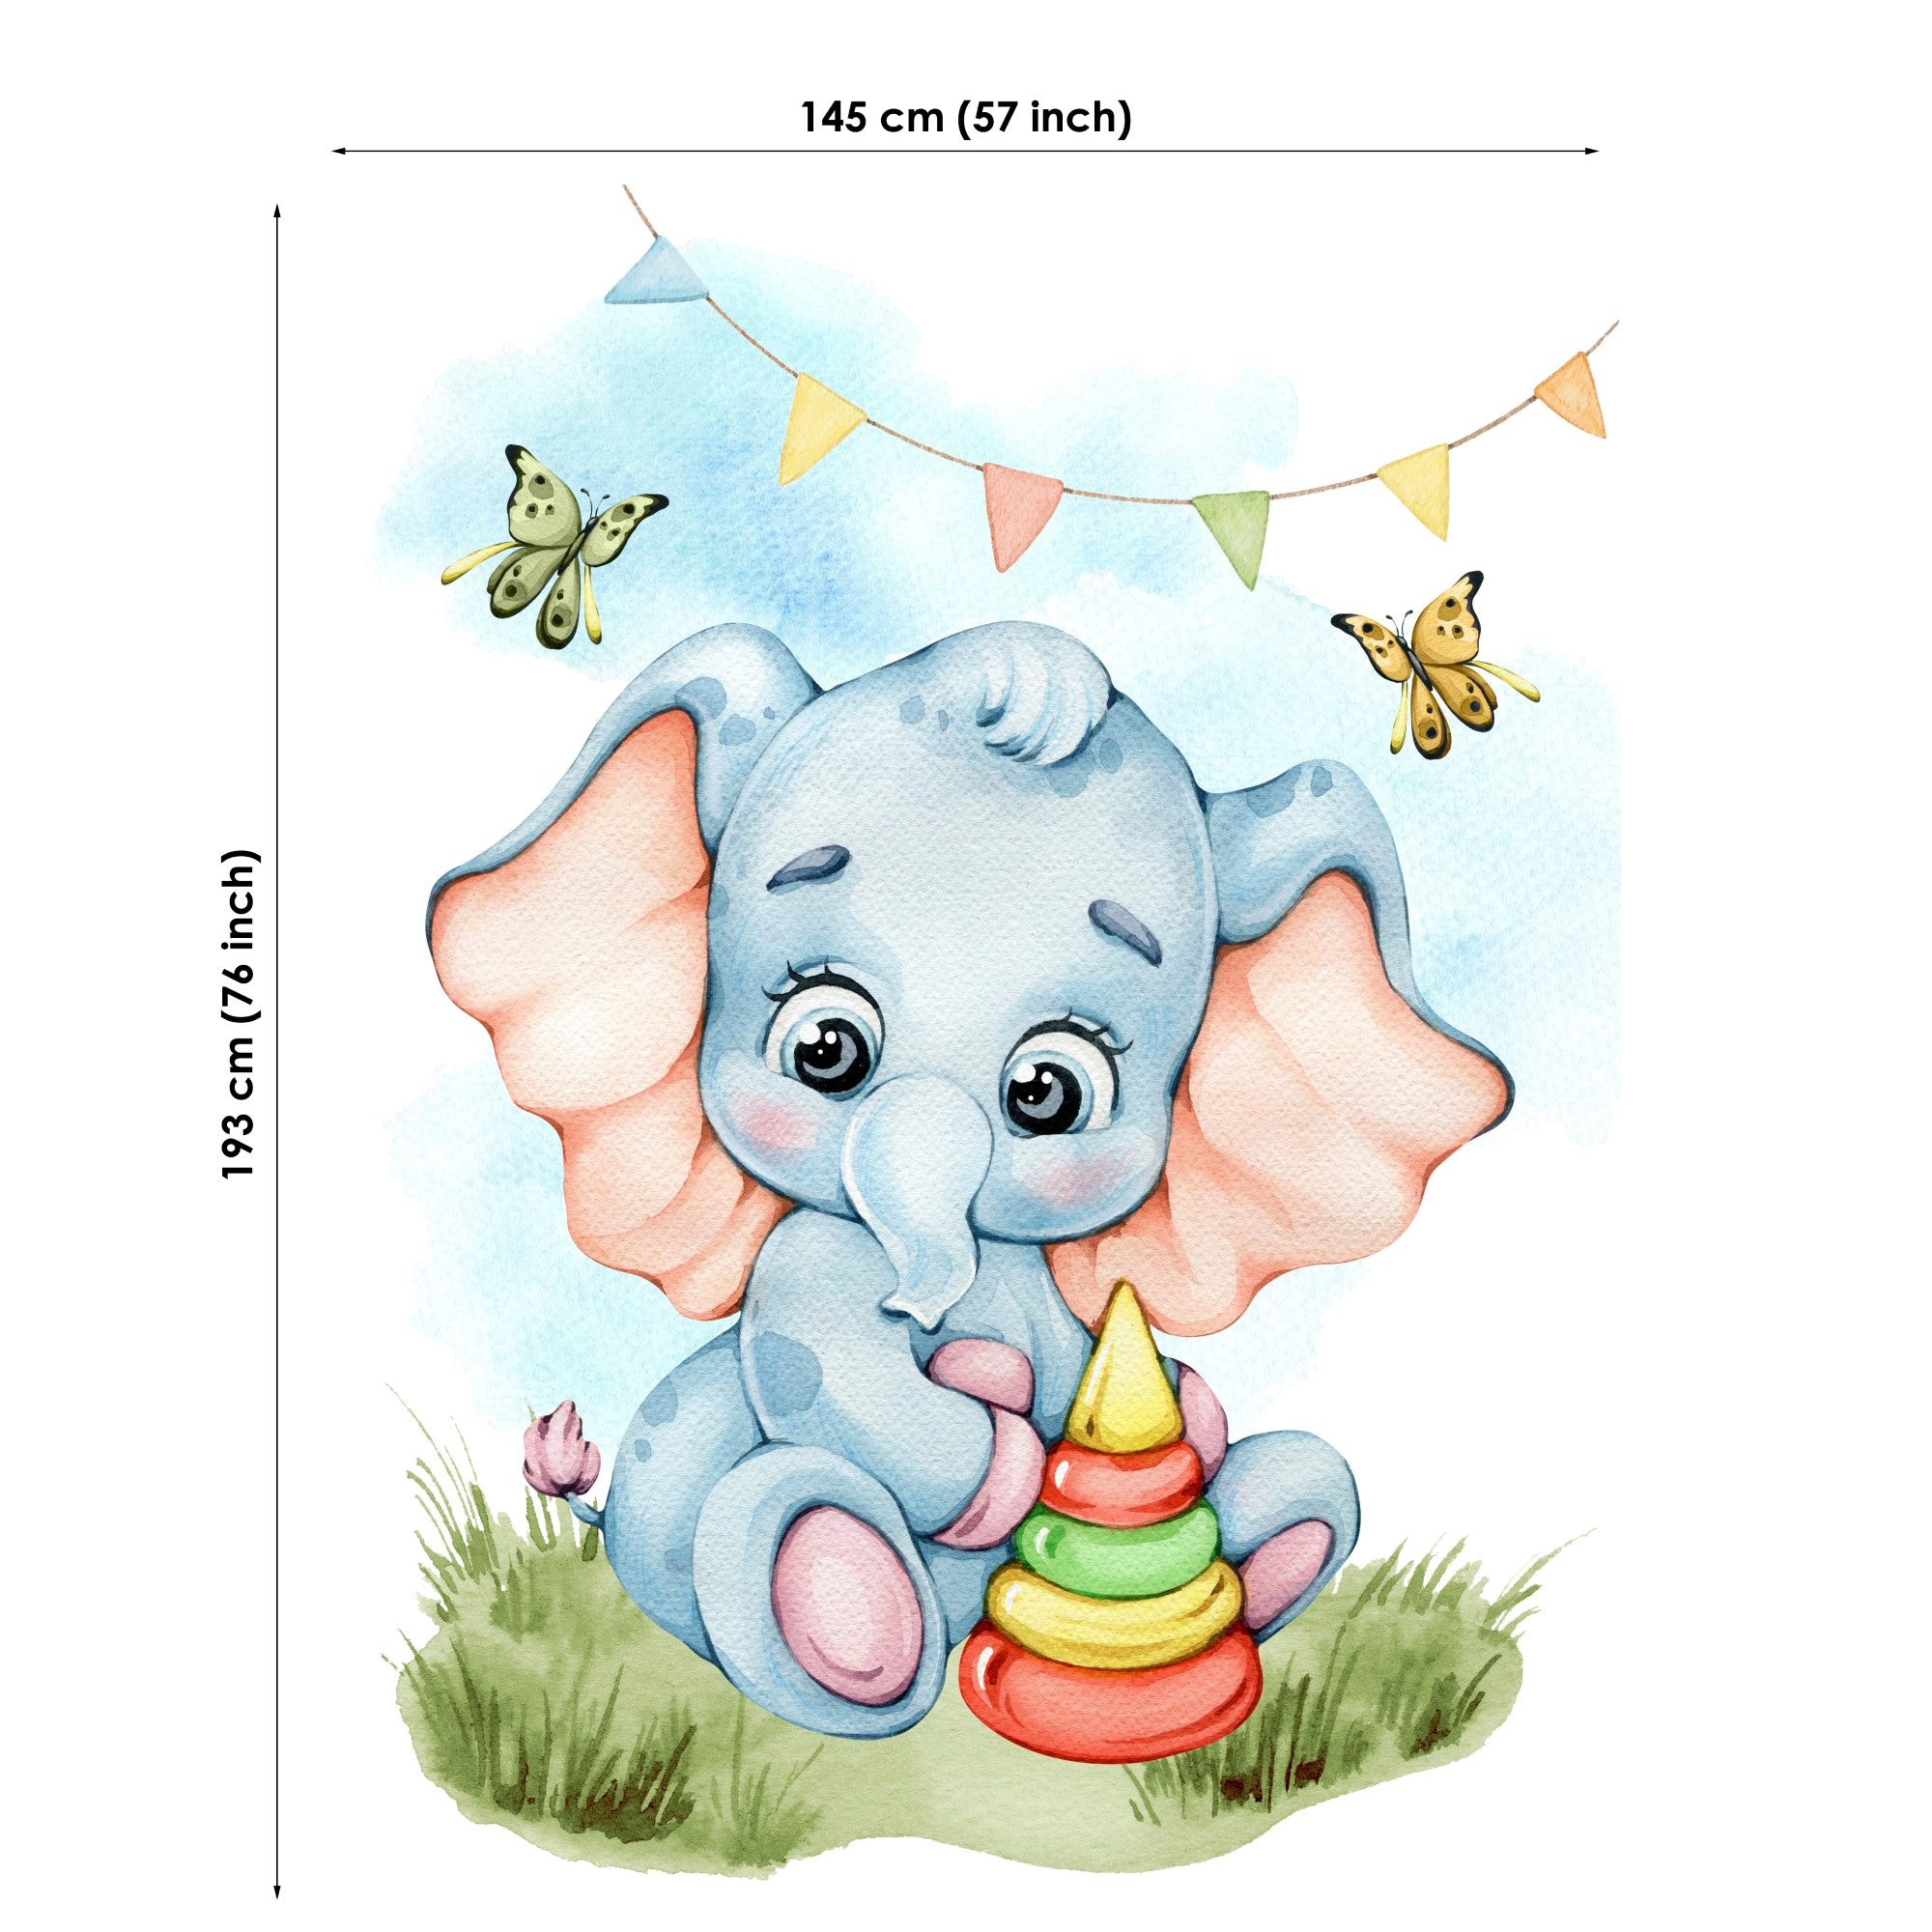 Baby Elephant Fabric Panels for Quilting, Baby Quilt Panels, Fabric Panels for Baby Quilts, Fabric Panels for Quilts, Quilting Fabric, Quilt Material, Blanket Making, DIY Sewing Projects